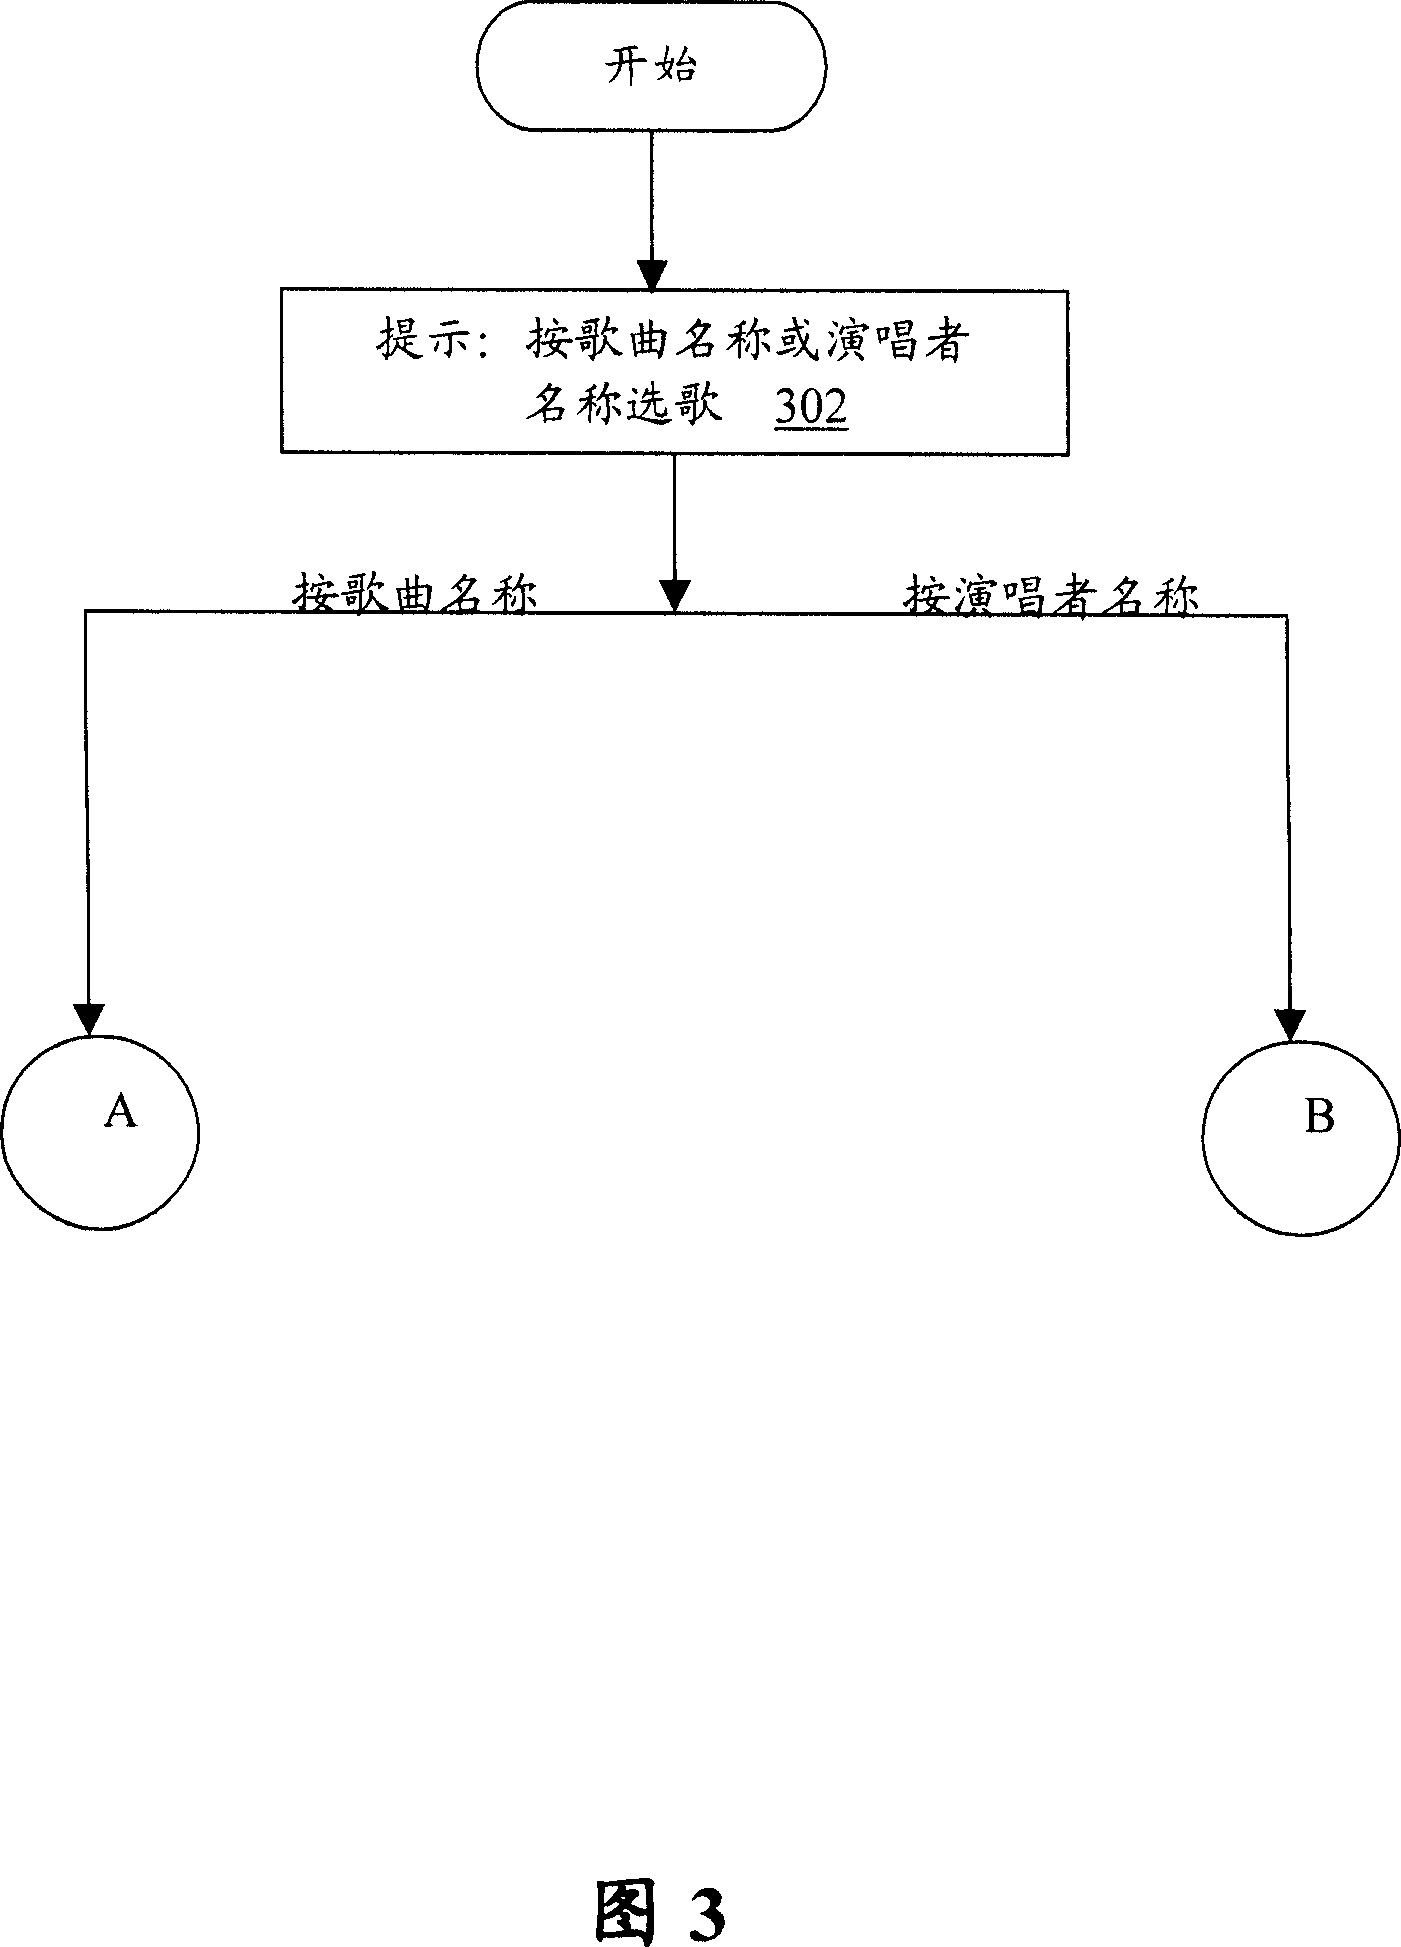 Speech recognition equipment and method